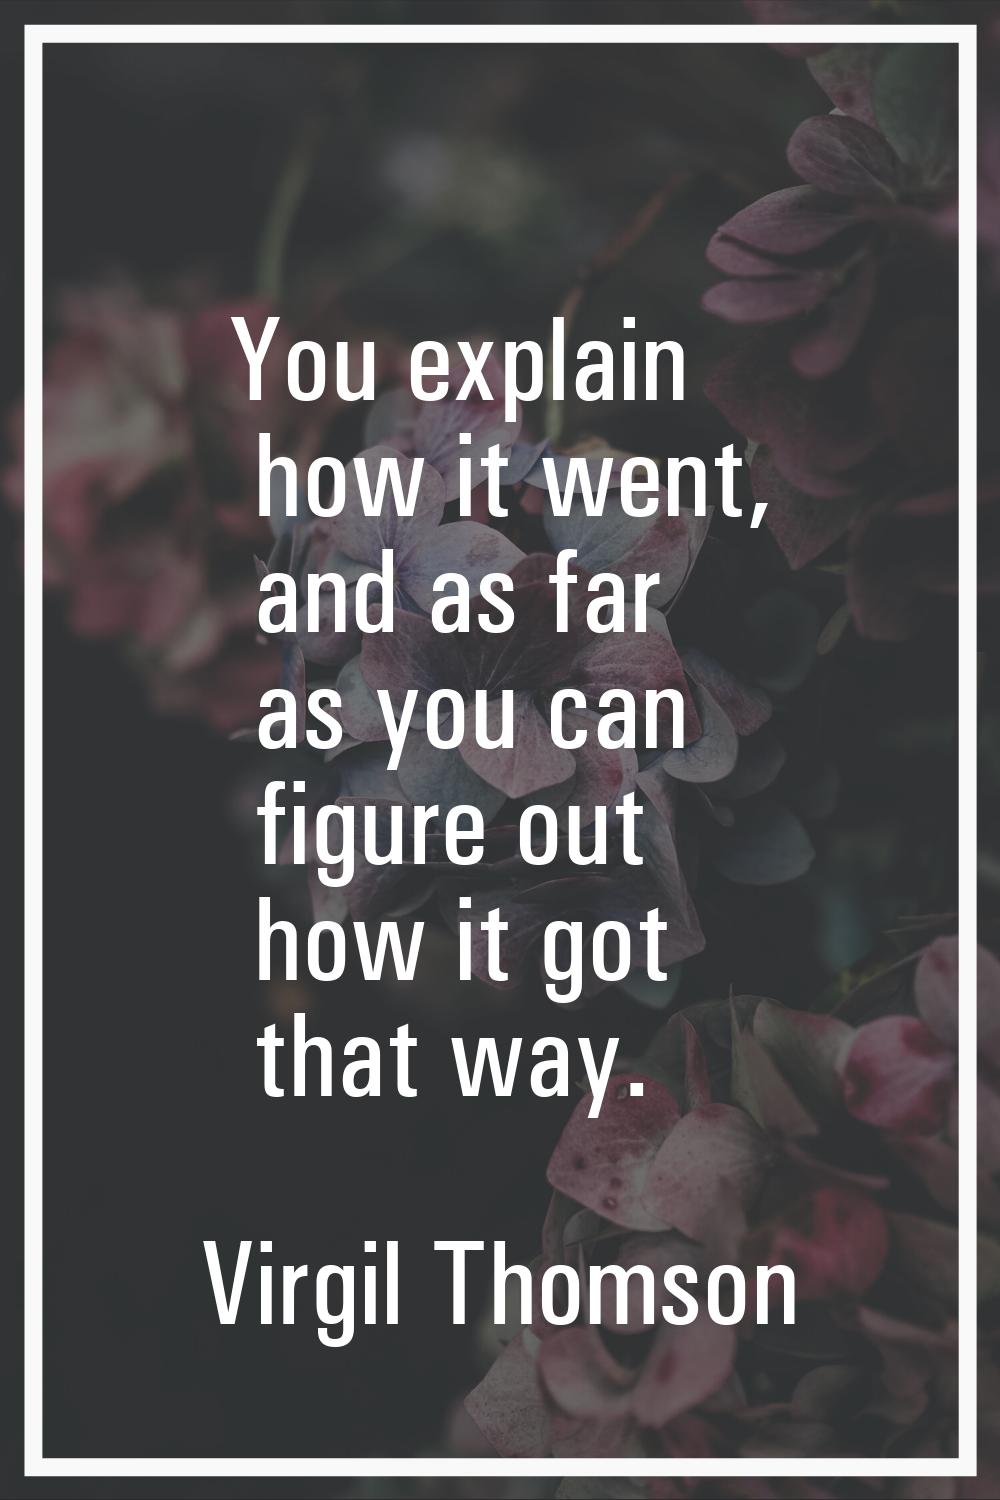 You explain how it went, and as far as you can figure out how it got that way.